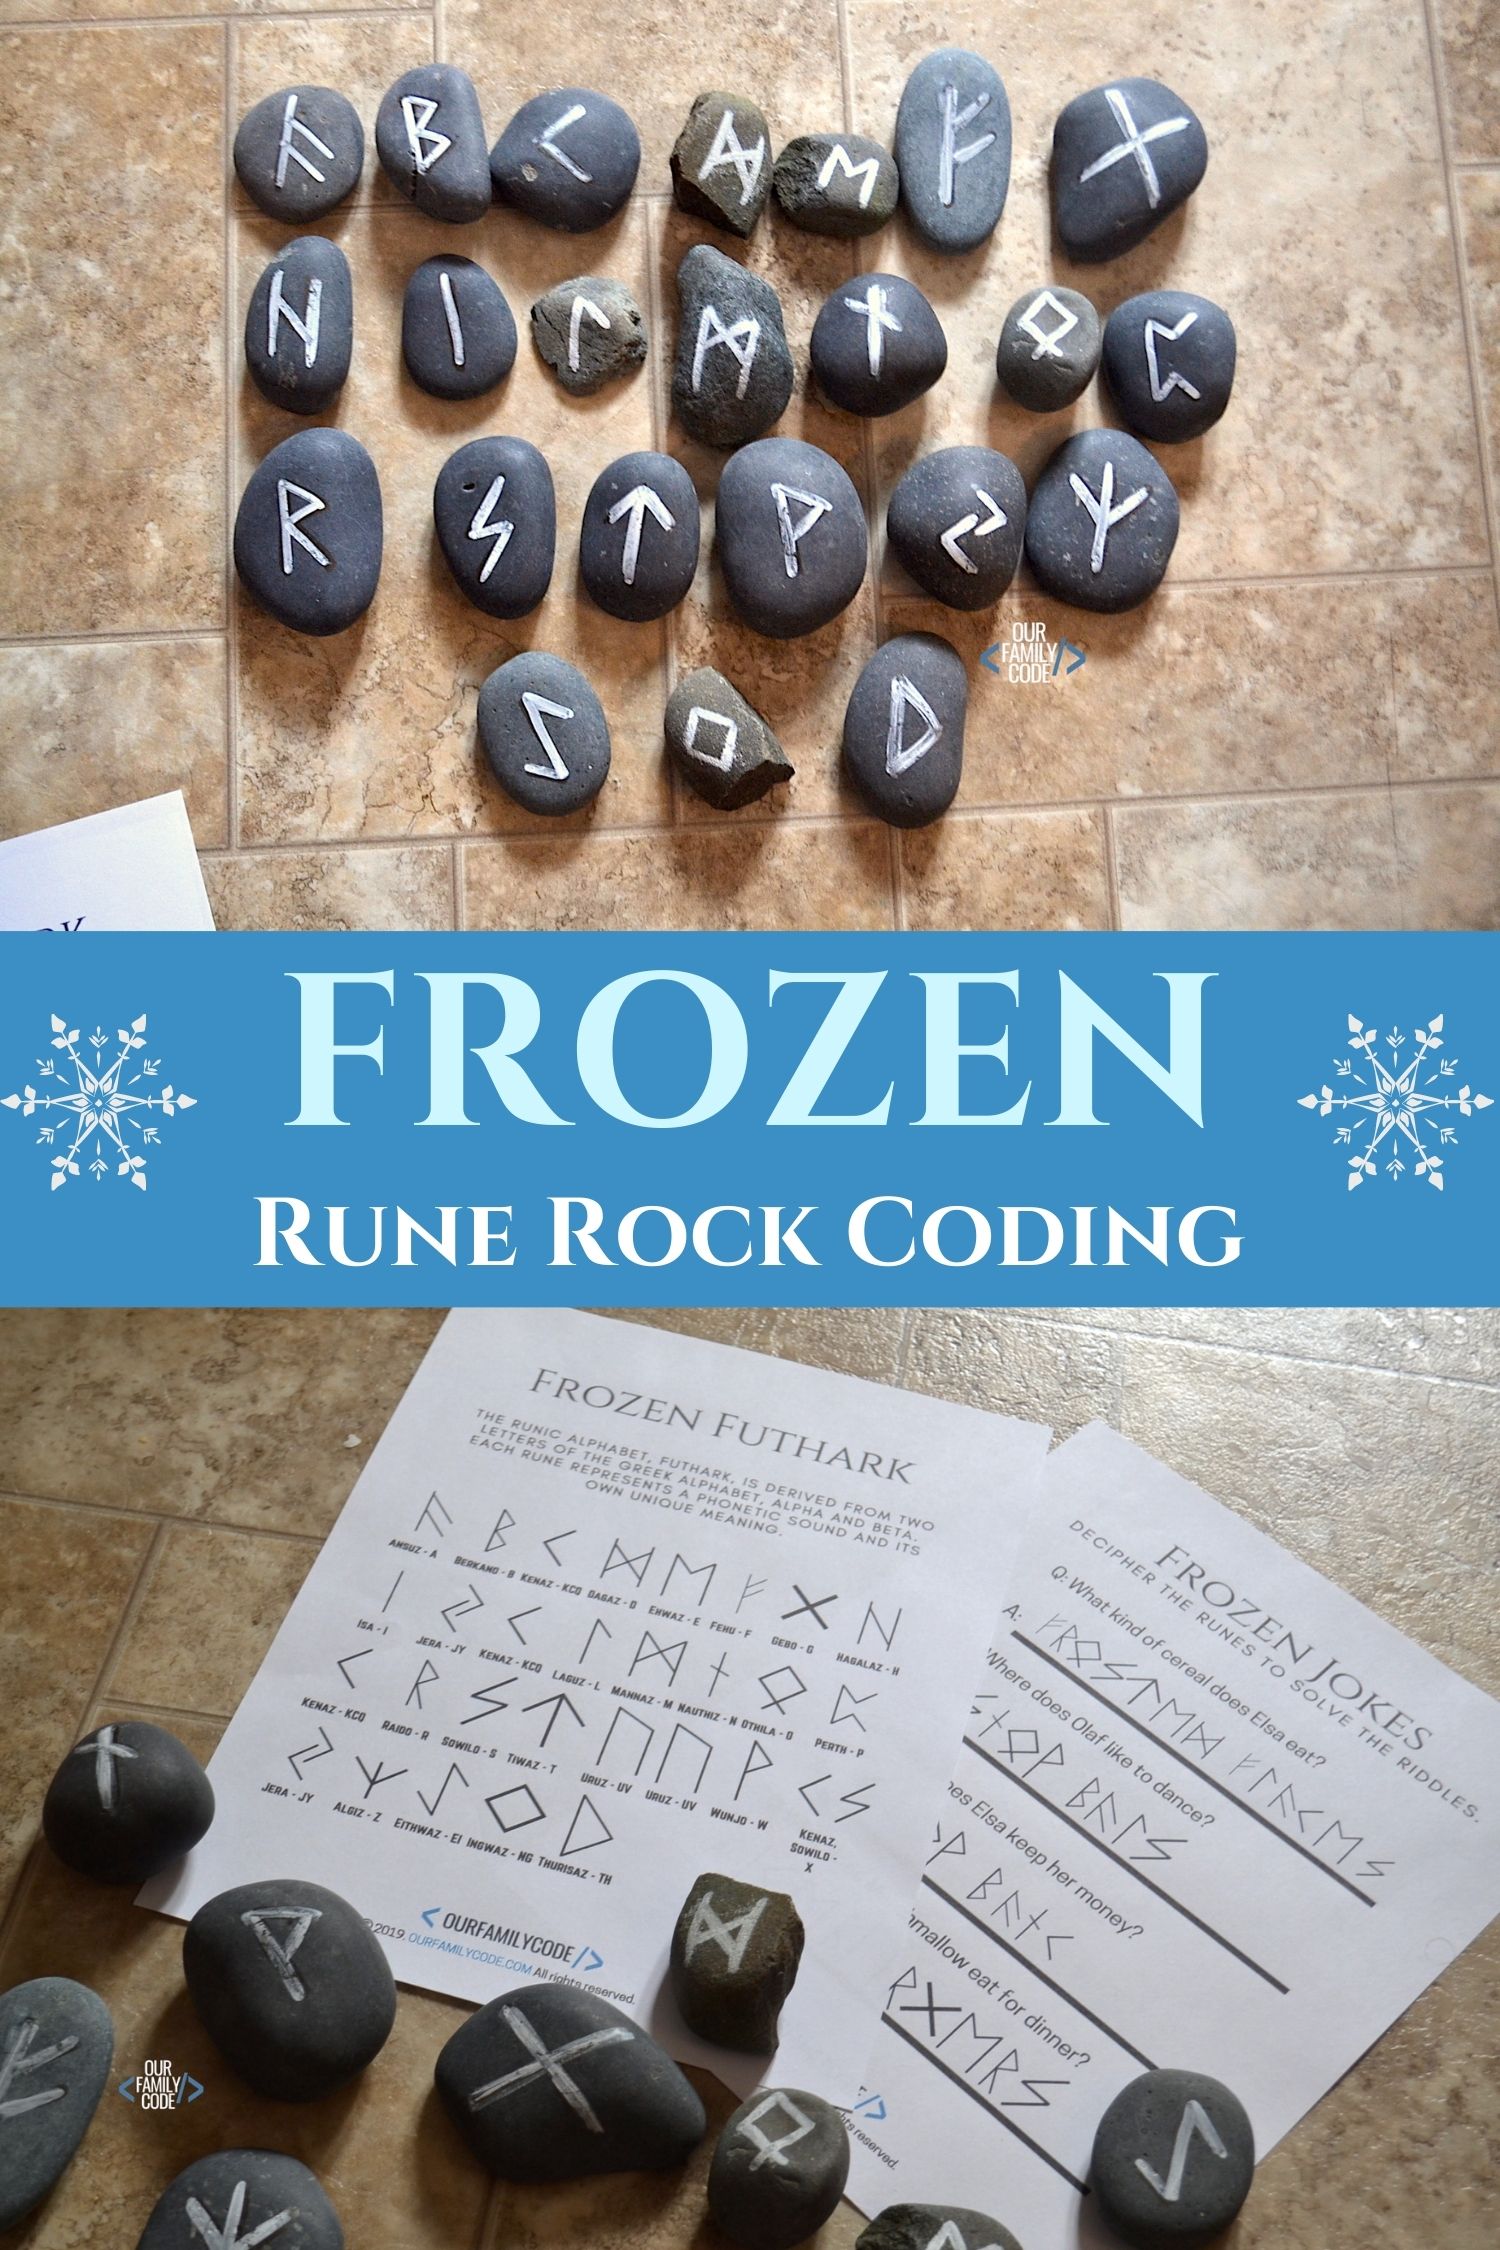 A picture of DIY rune rocks with worksheets on ground.